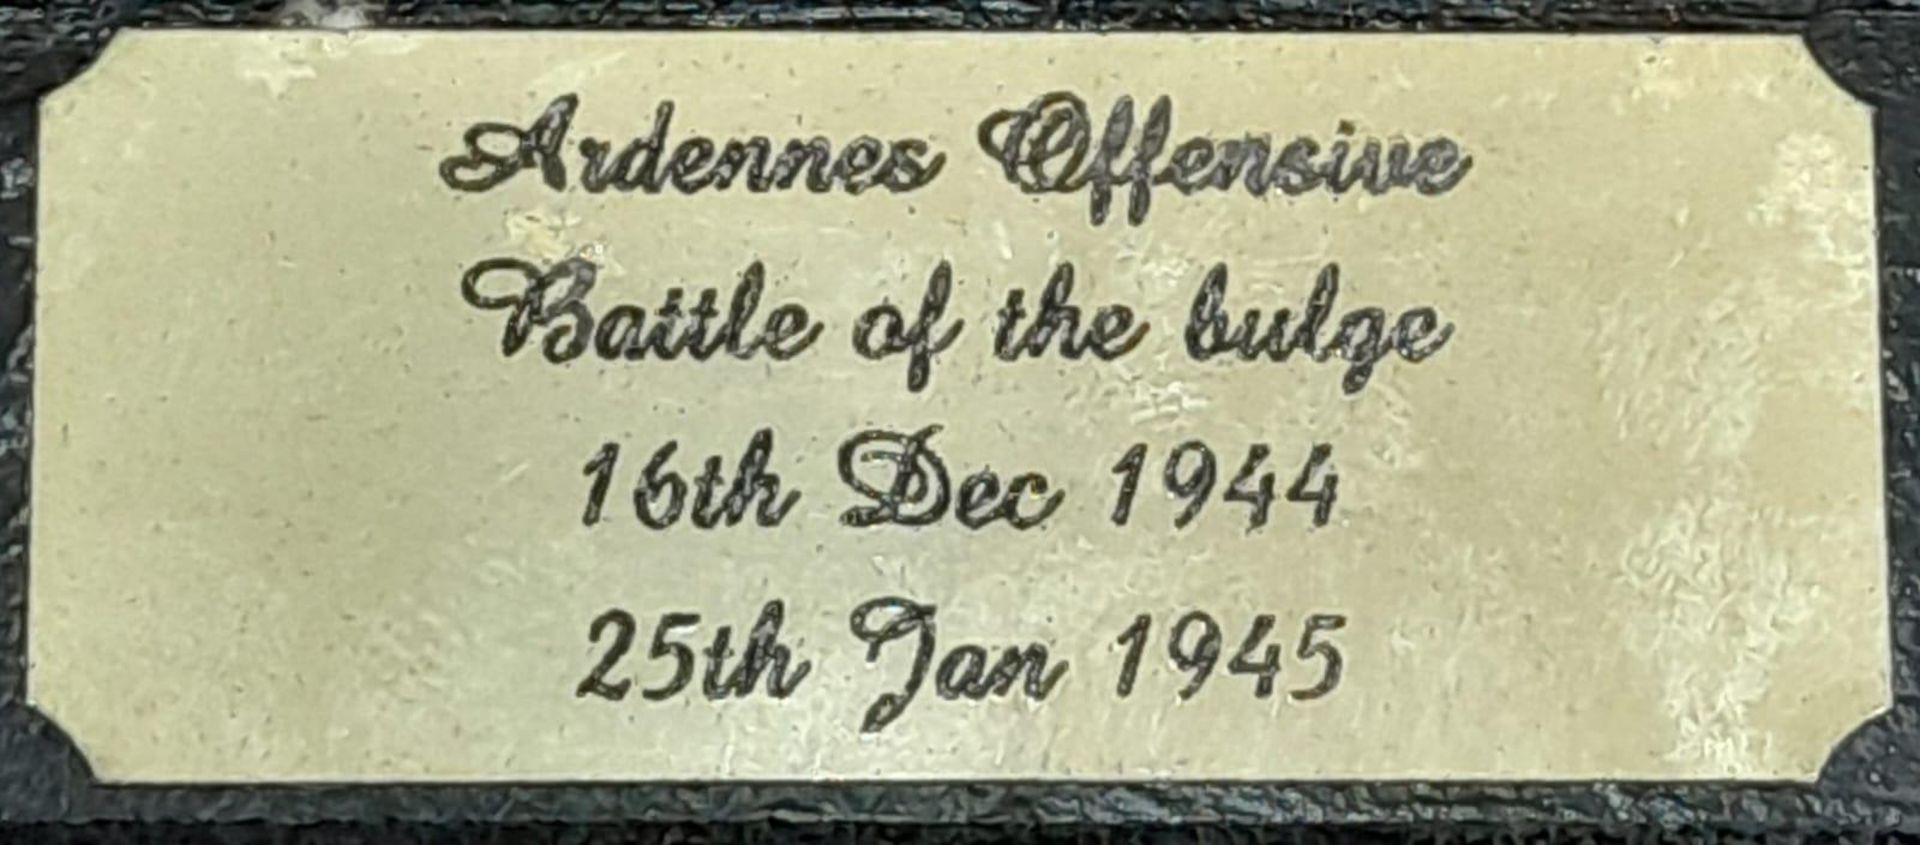 Resin Wall Plaque Memorial Dedicated to the Battle of the Bulge. - Image 4 of 7